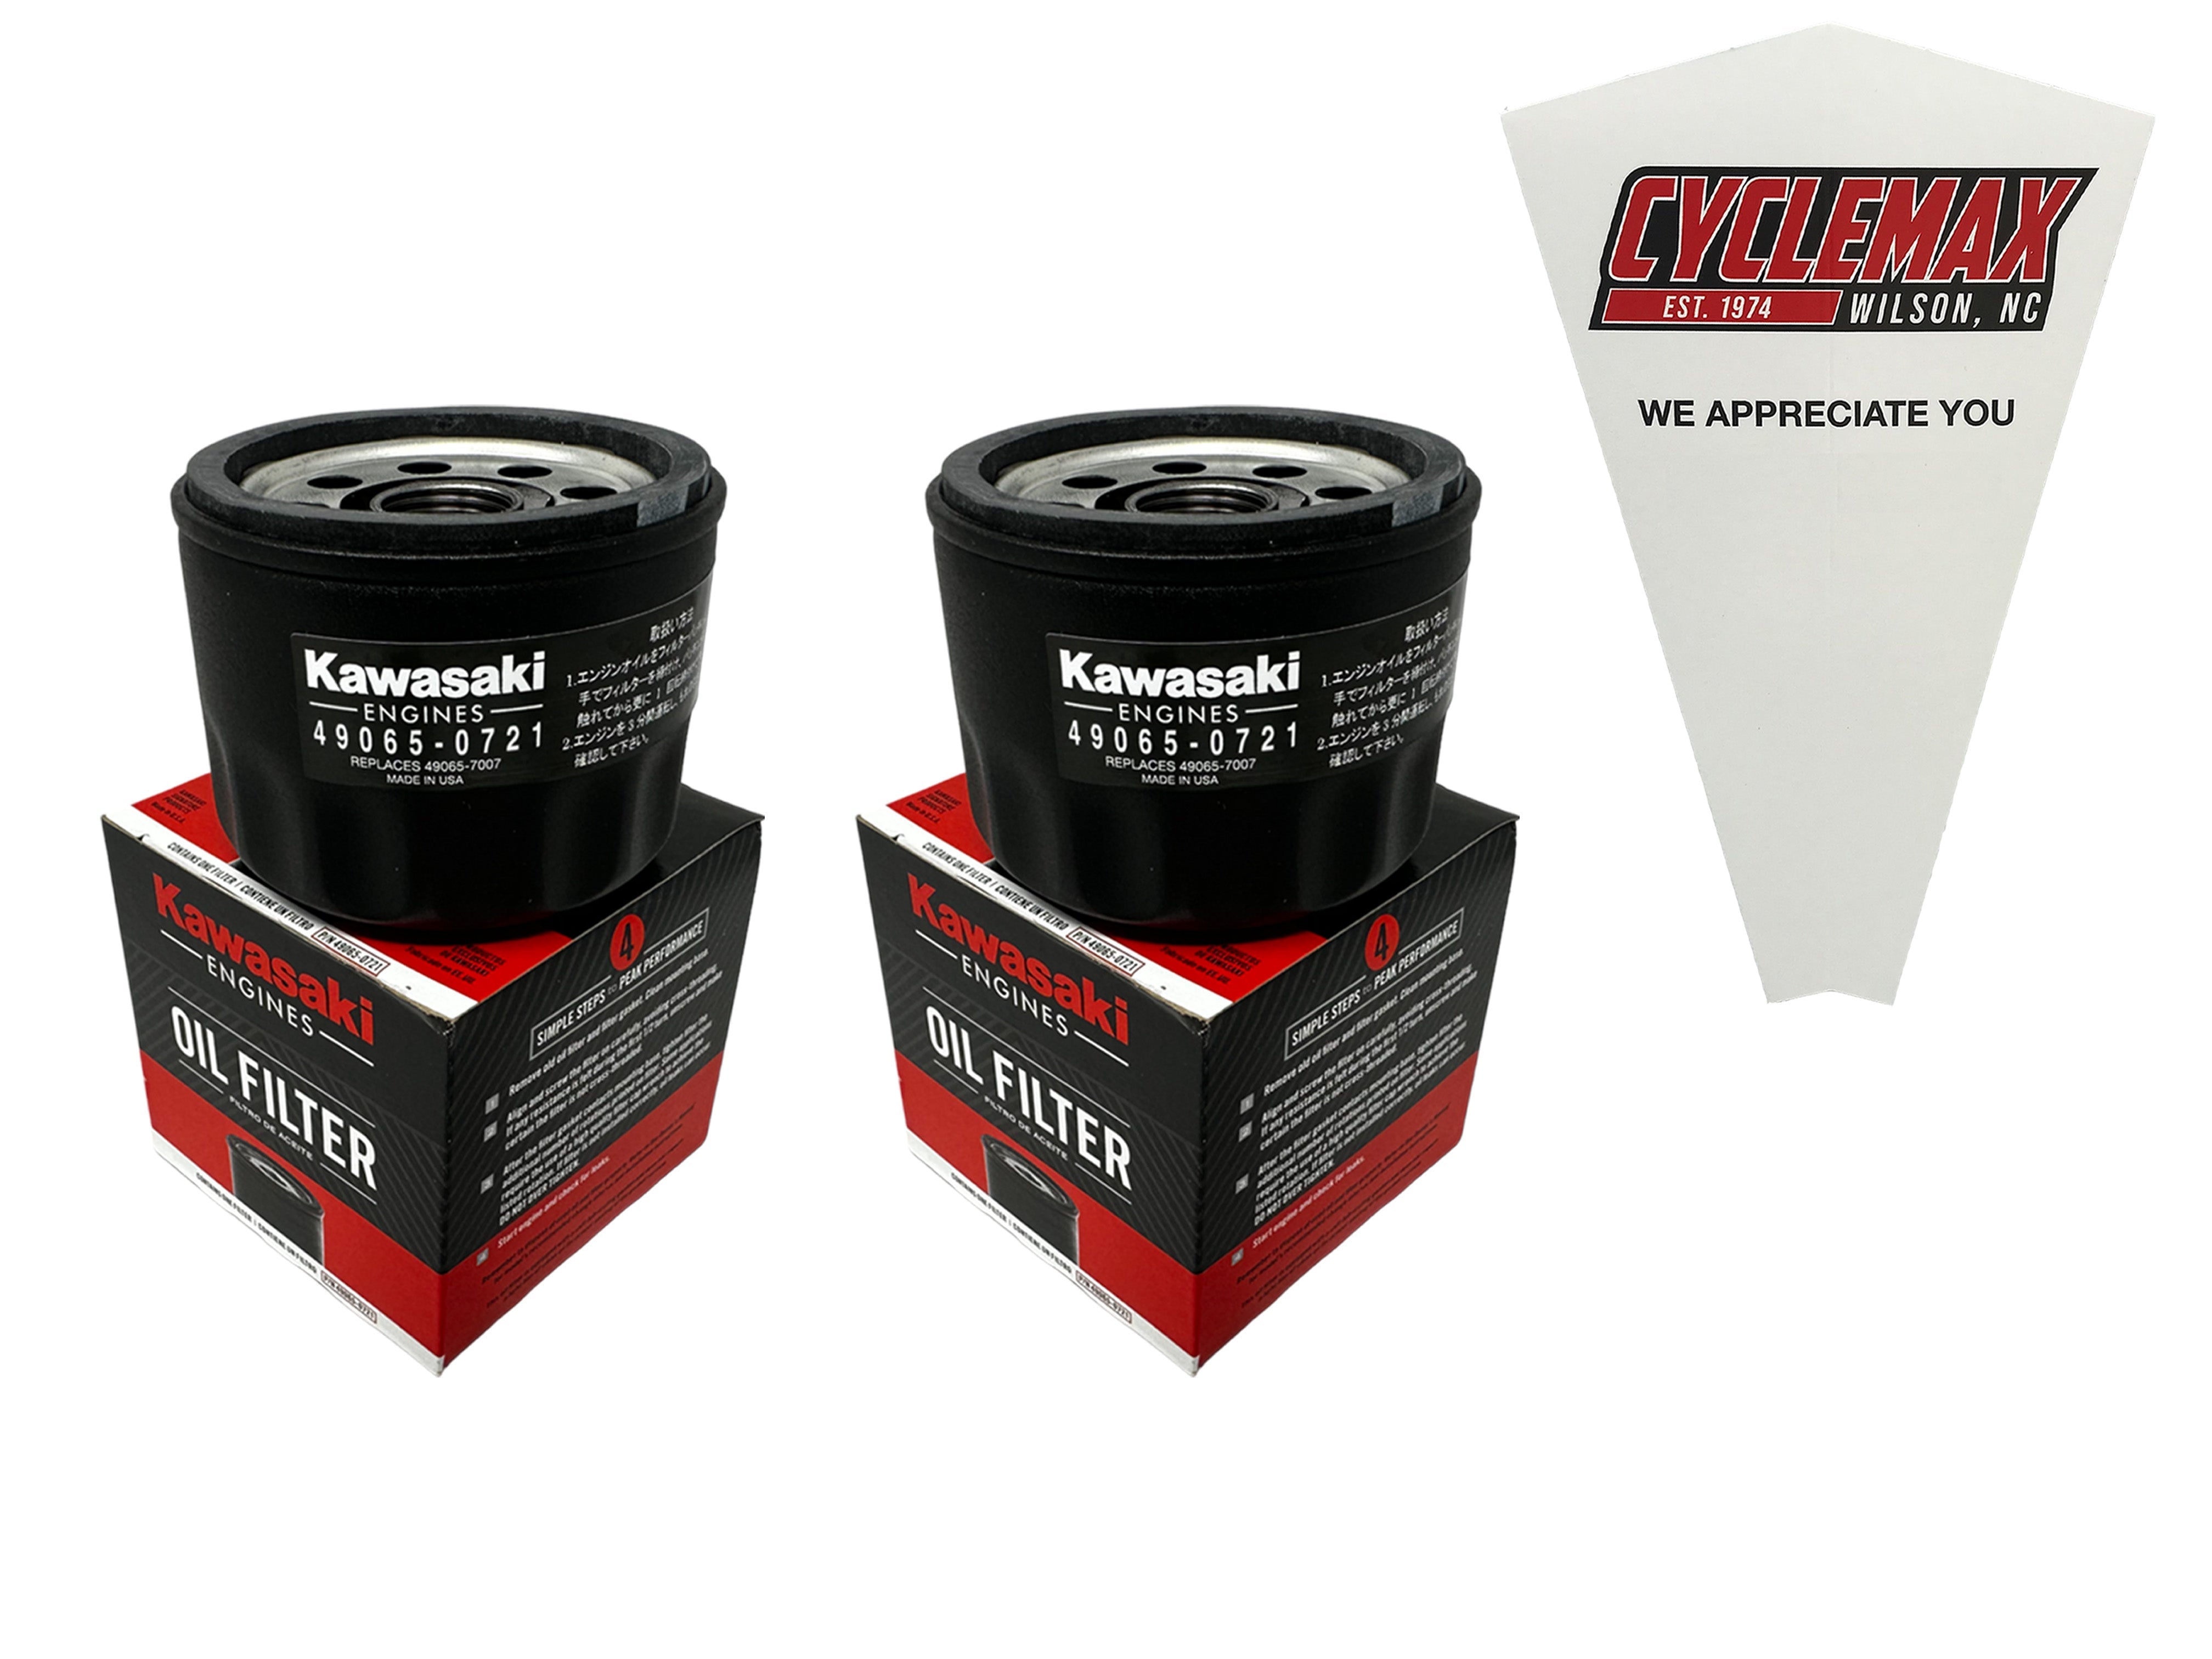 Cyclemax Two Pack for Kawasaki Oil Filter 49065-0721 Contains Two Filters and a Funnel